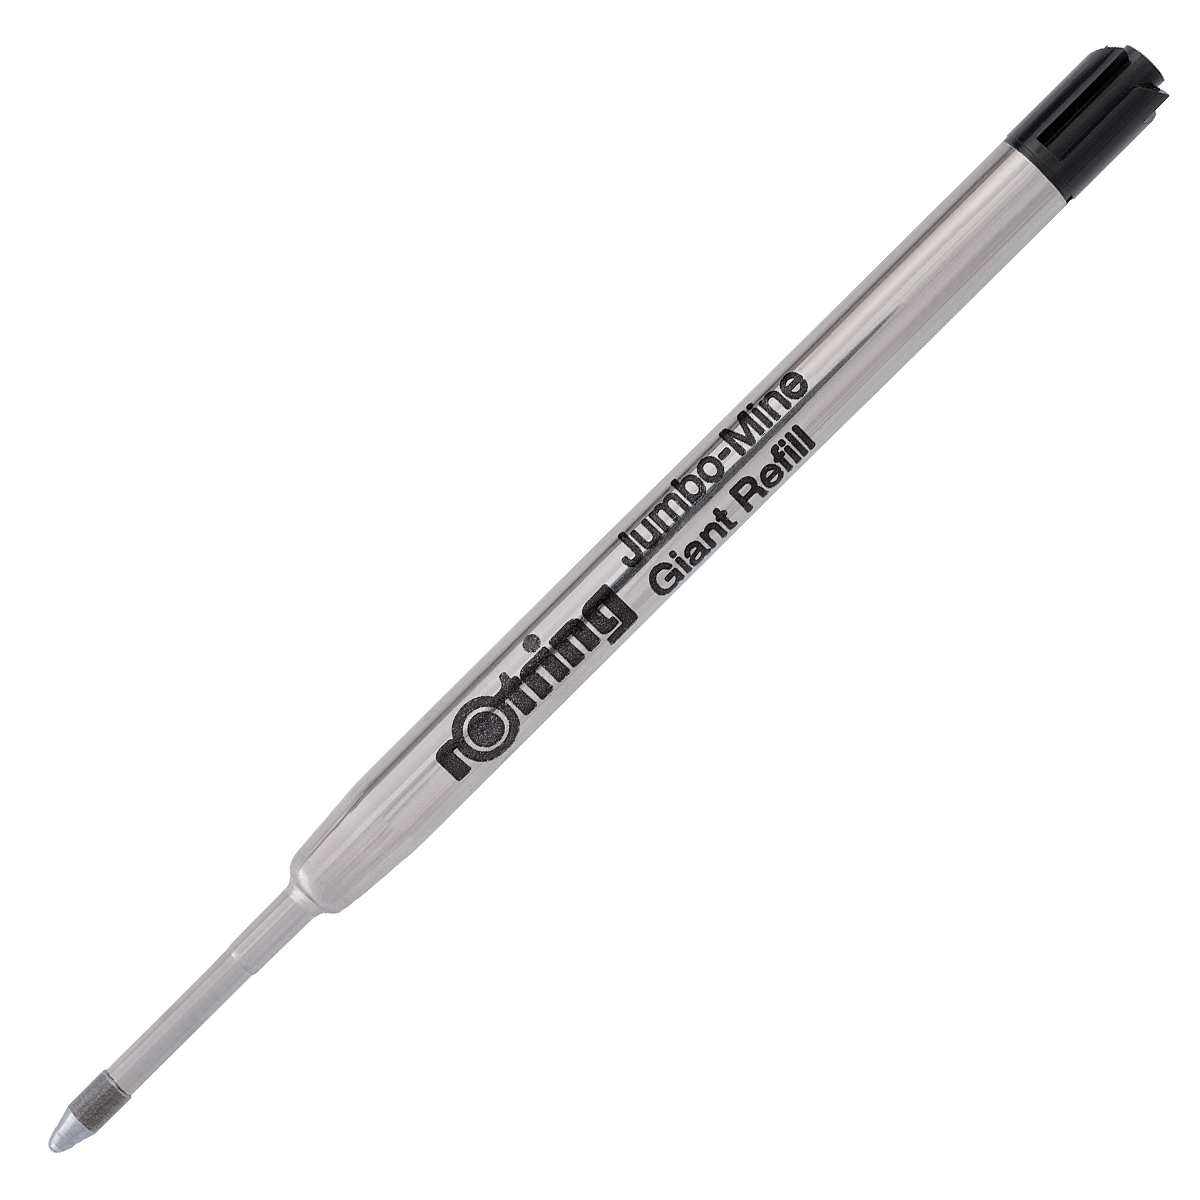 Ballpoint refill Jumbo in the group Pens / Pen Accessories / Cartridges & Refills at Pen Store (127780_r)